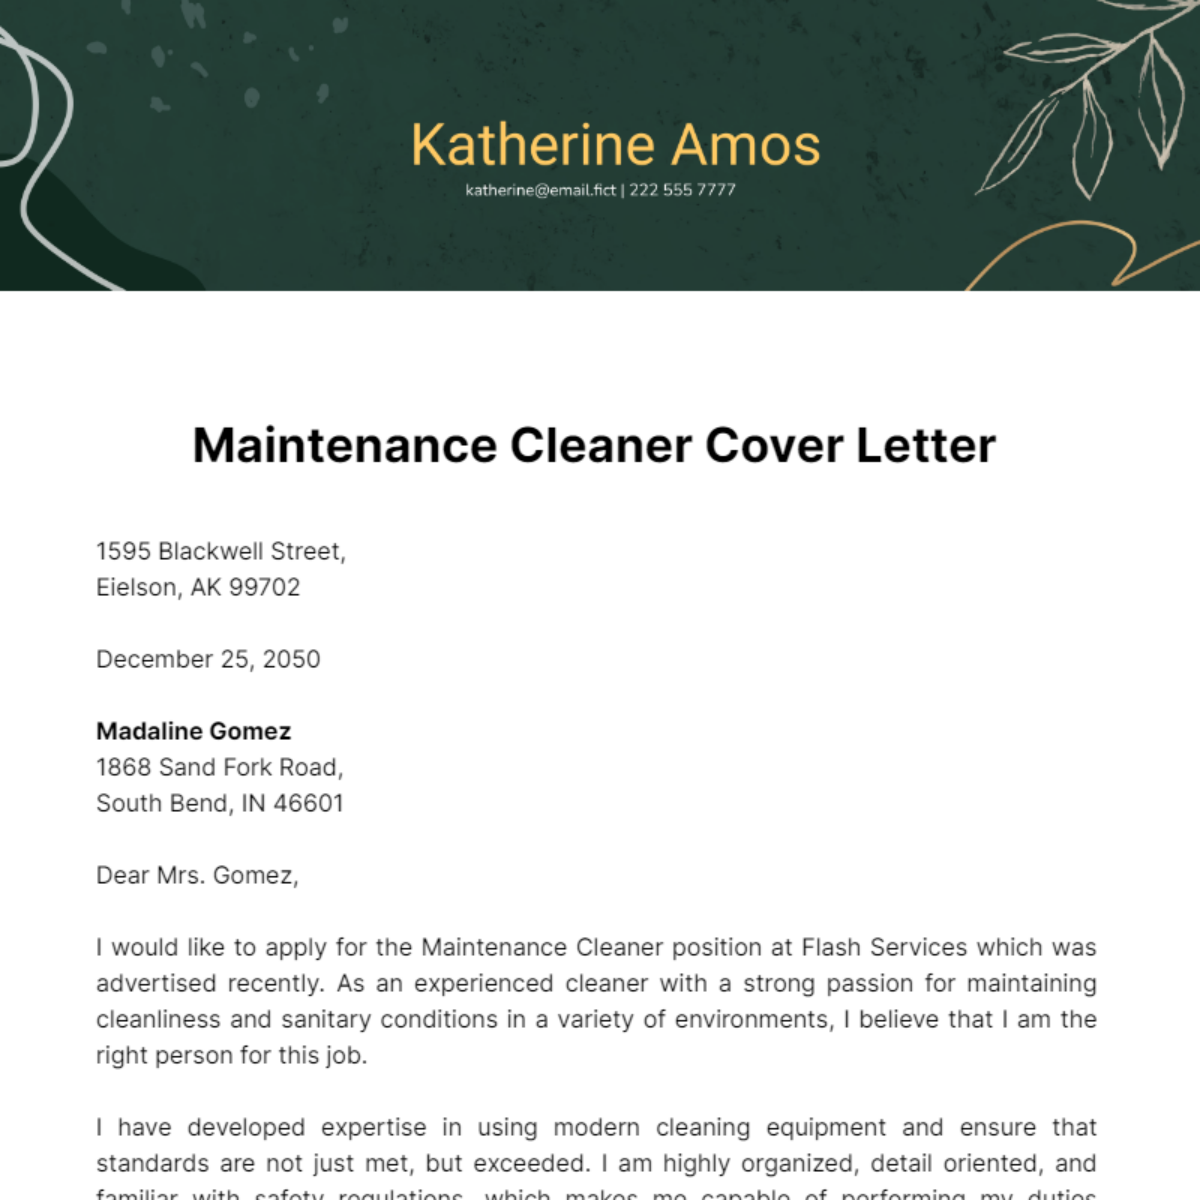 Maintenance Cleaner Cover Letter Template